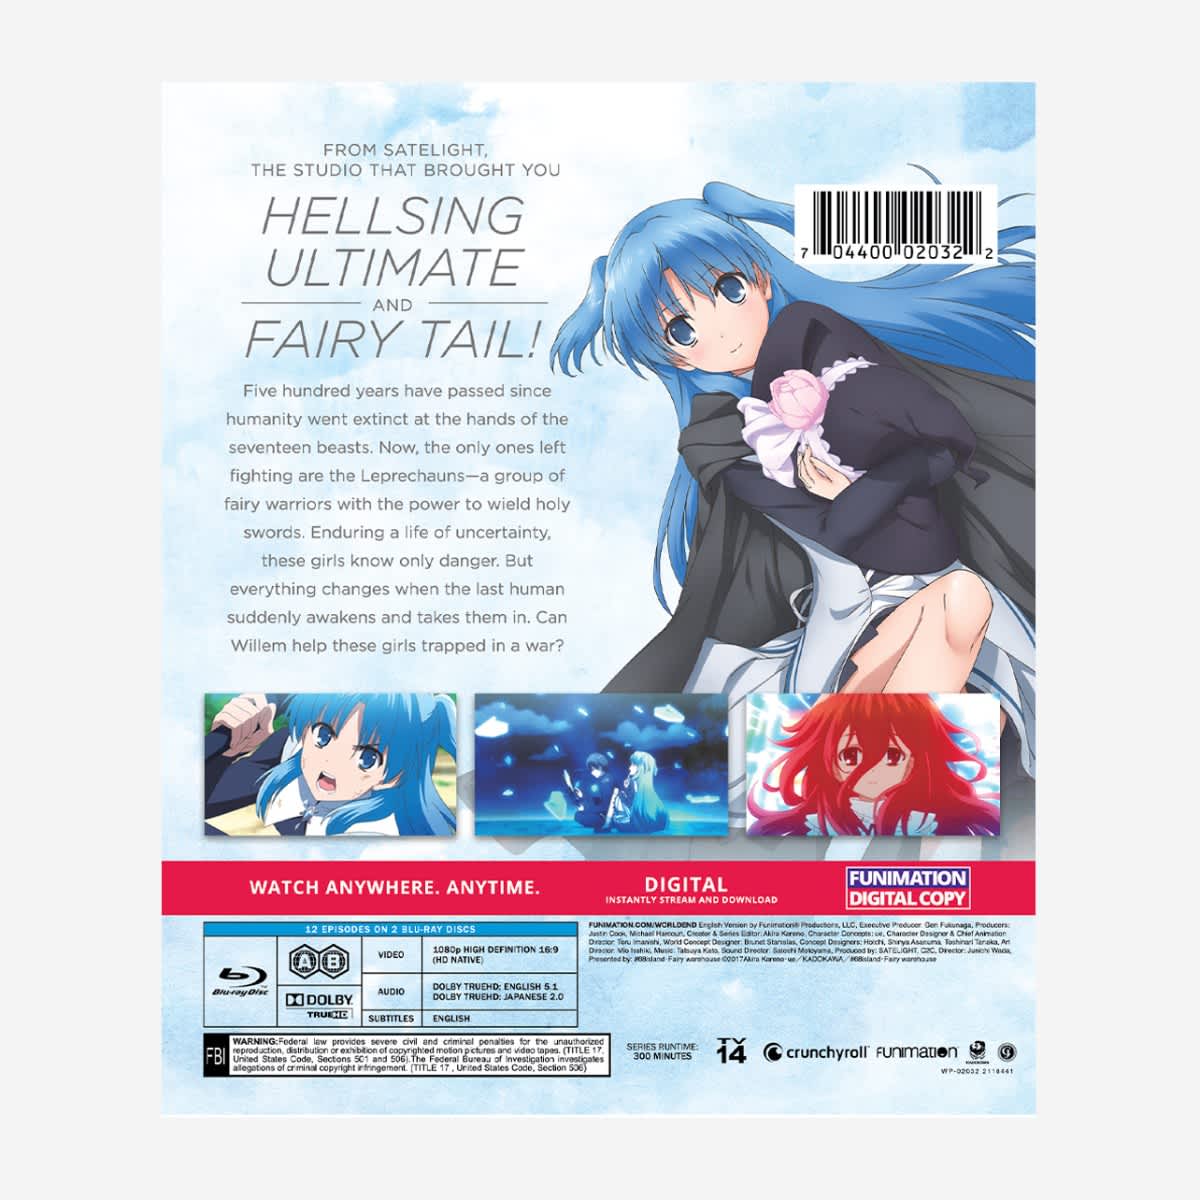 New on Blu-ray: WORLDEND - WHAT ARE YOU DOING AT THE END OF THE